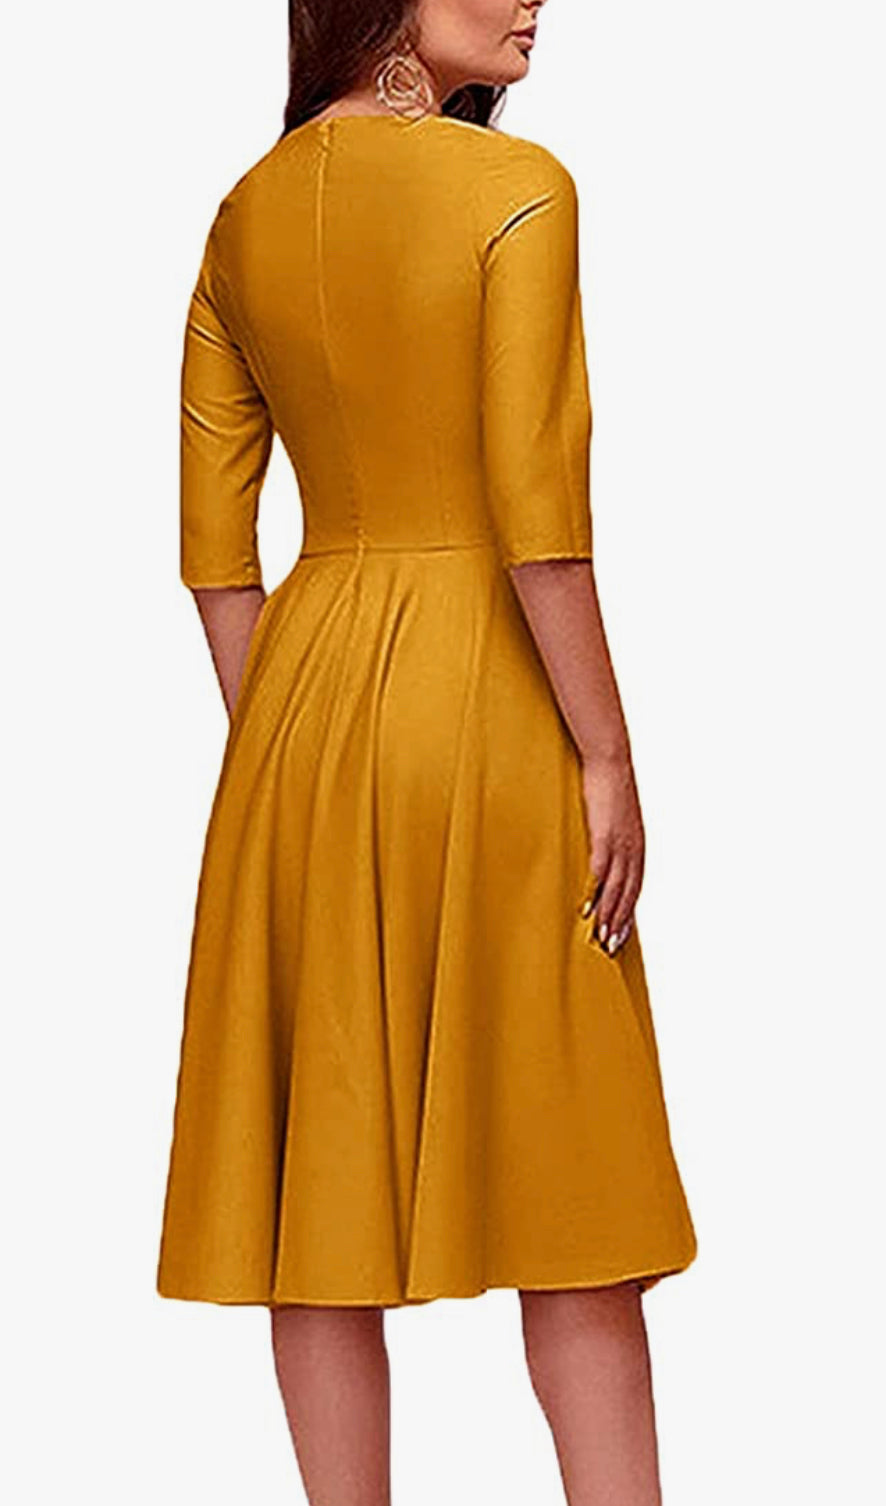 Elegant Audrey Hepburn Style Ruched 3/4 Sleeve Casual Swing A-line Dress (Yellow)